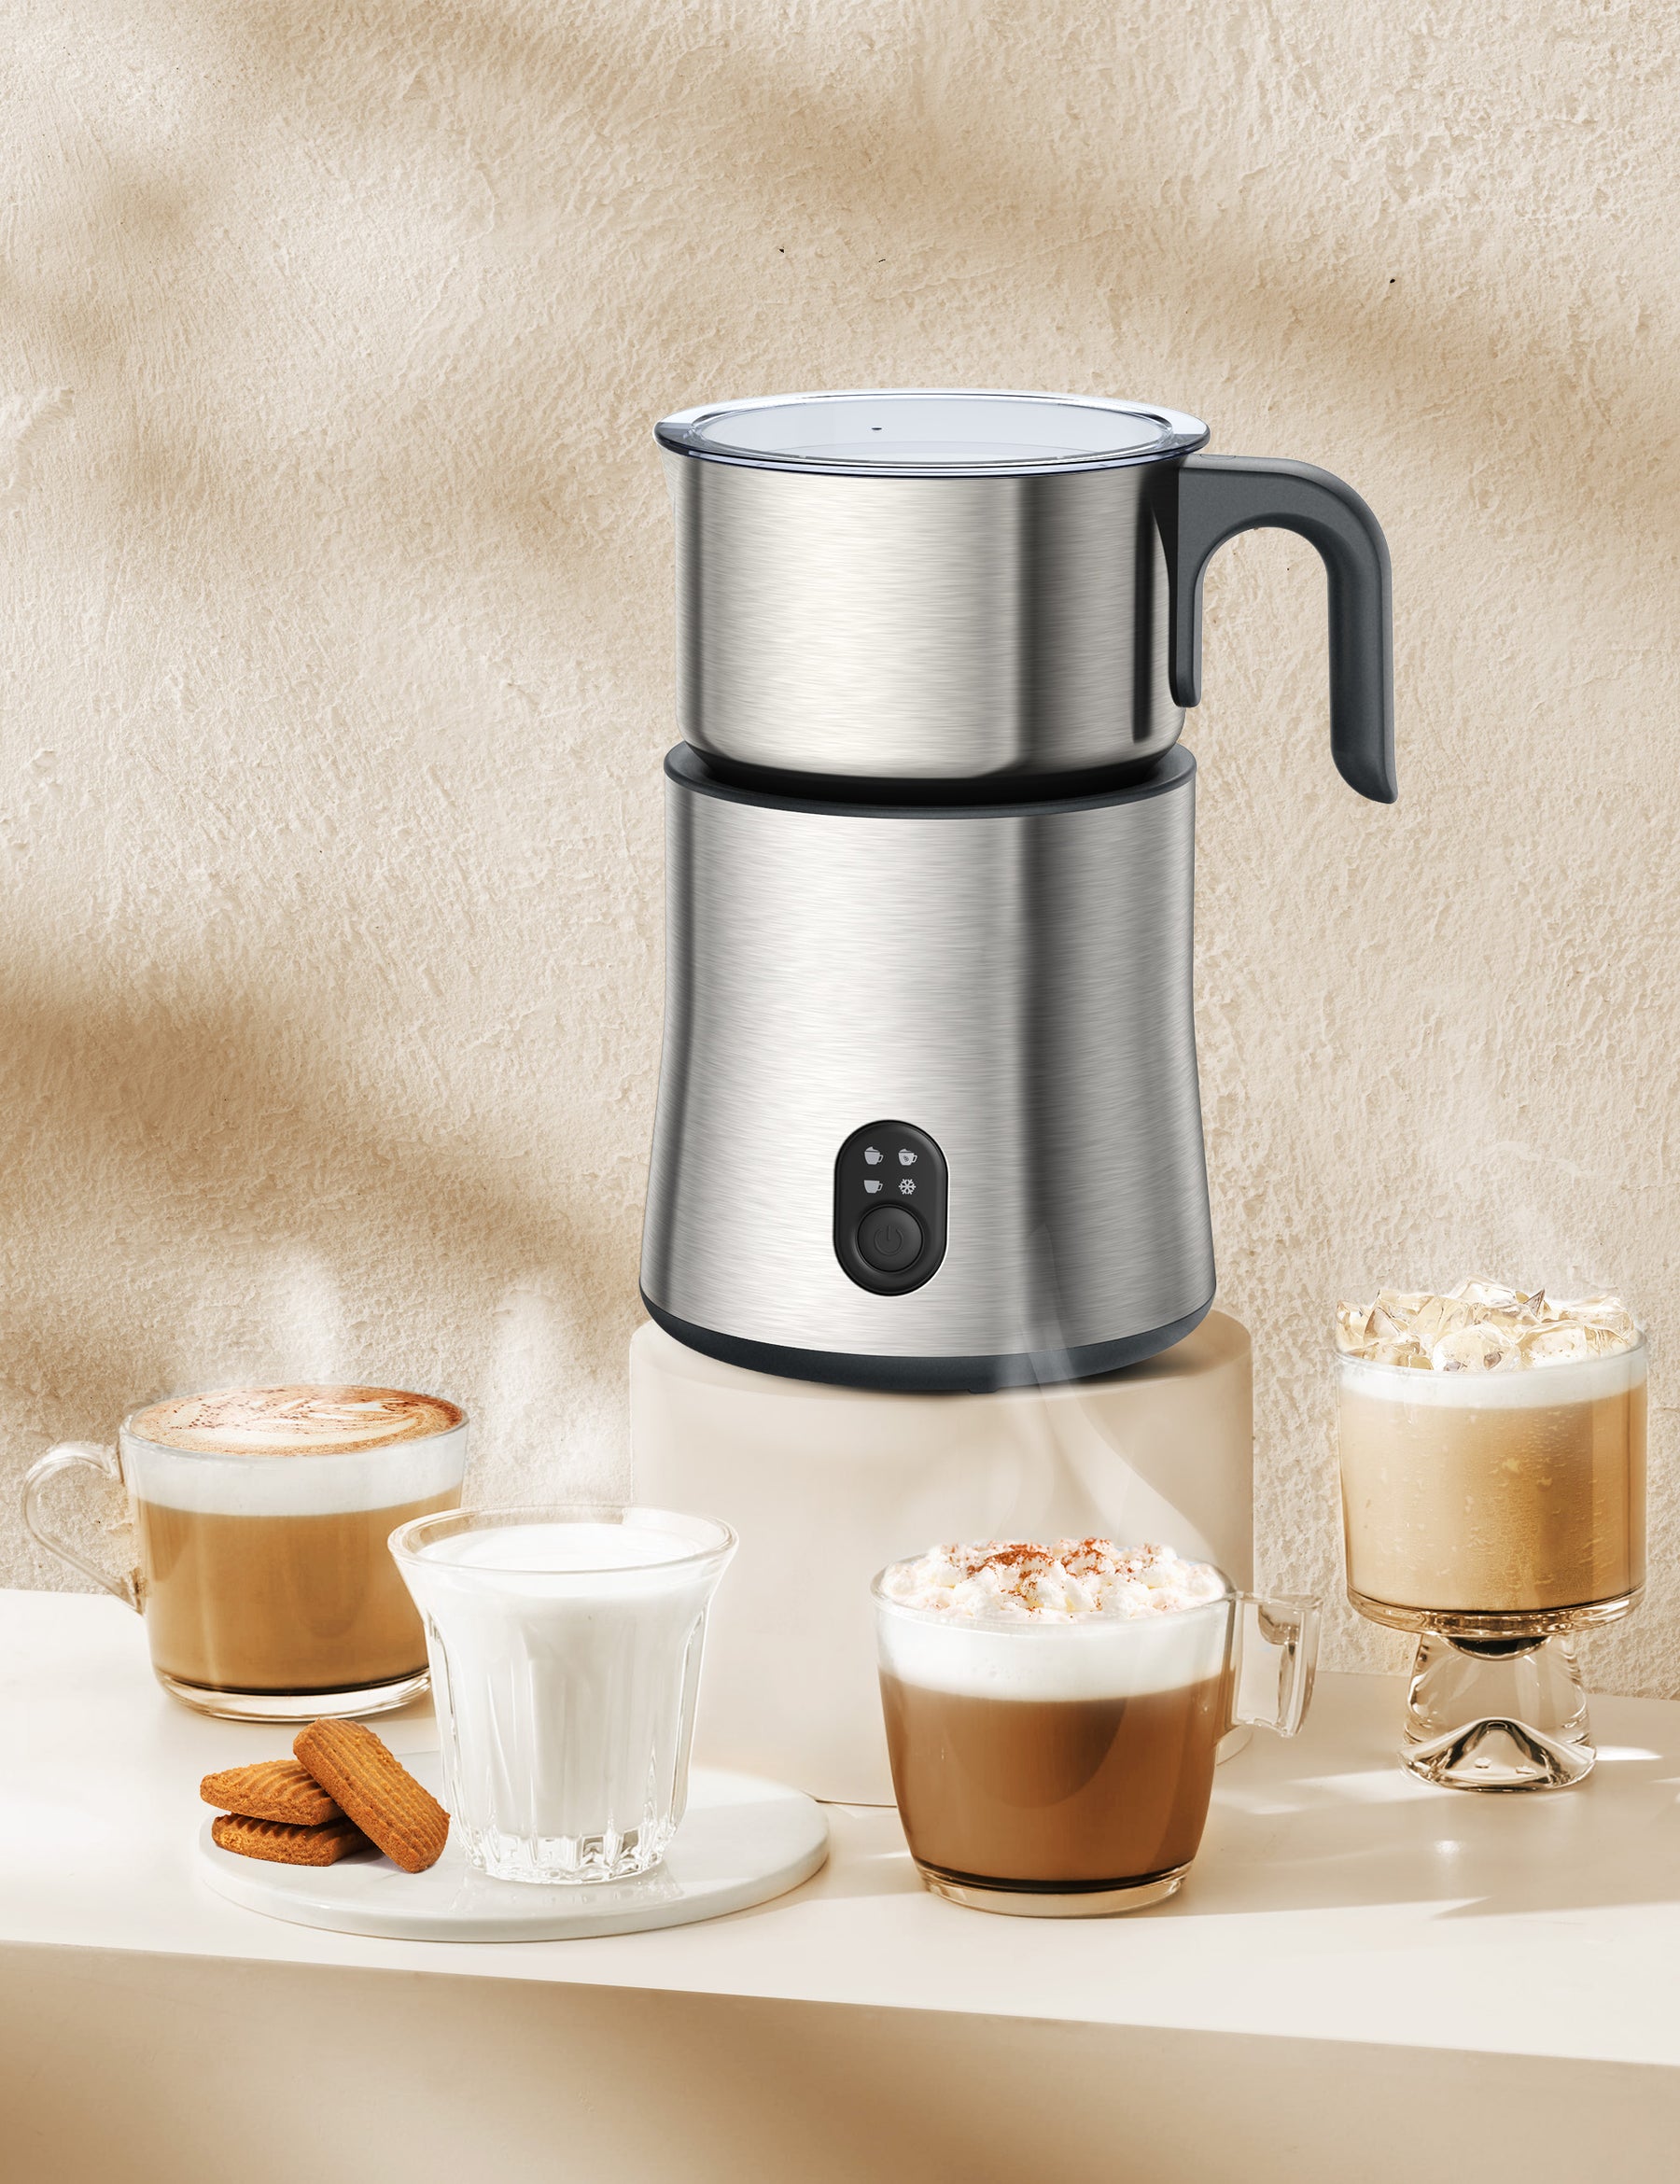 Auto Milk Frother & Steamer Coffee maker Electric Milk warmer for Latte Art  Chocolate Hot/Cold foaming Portable Milk Frother